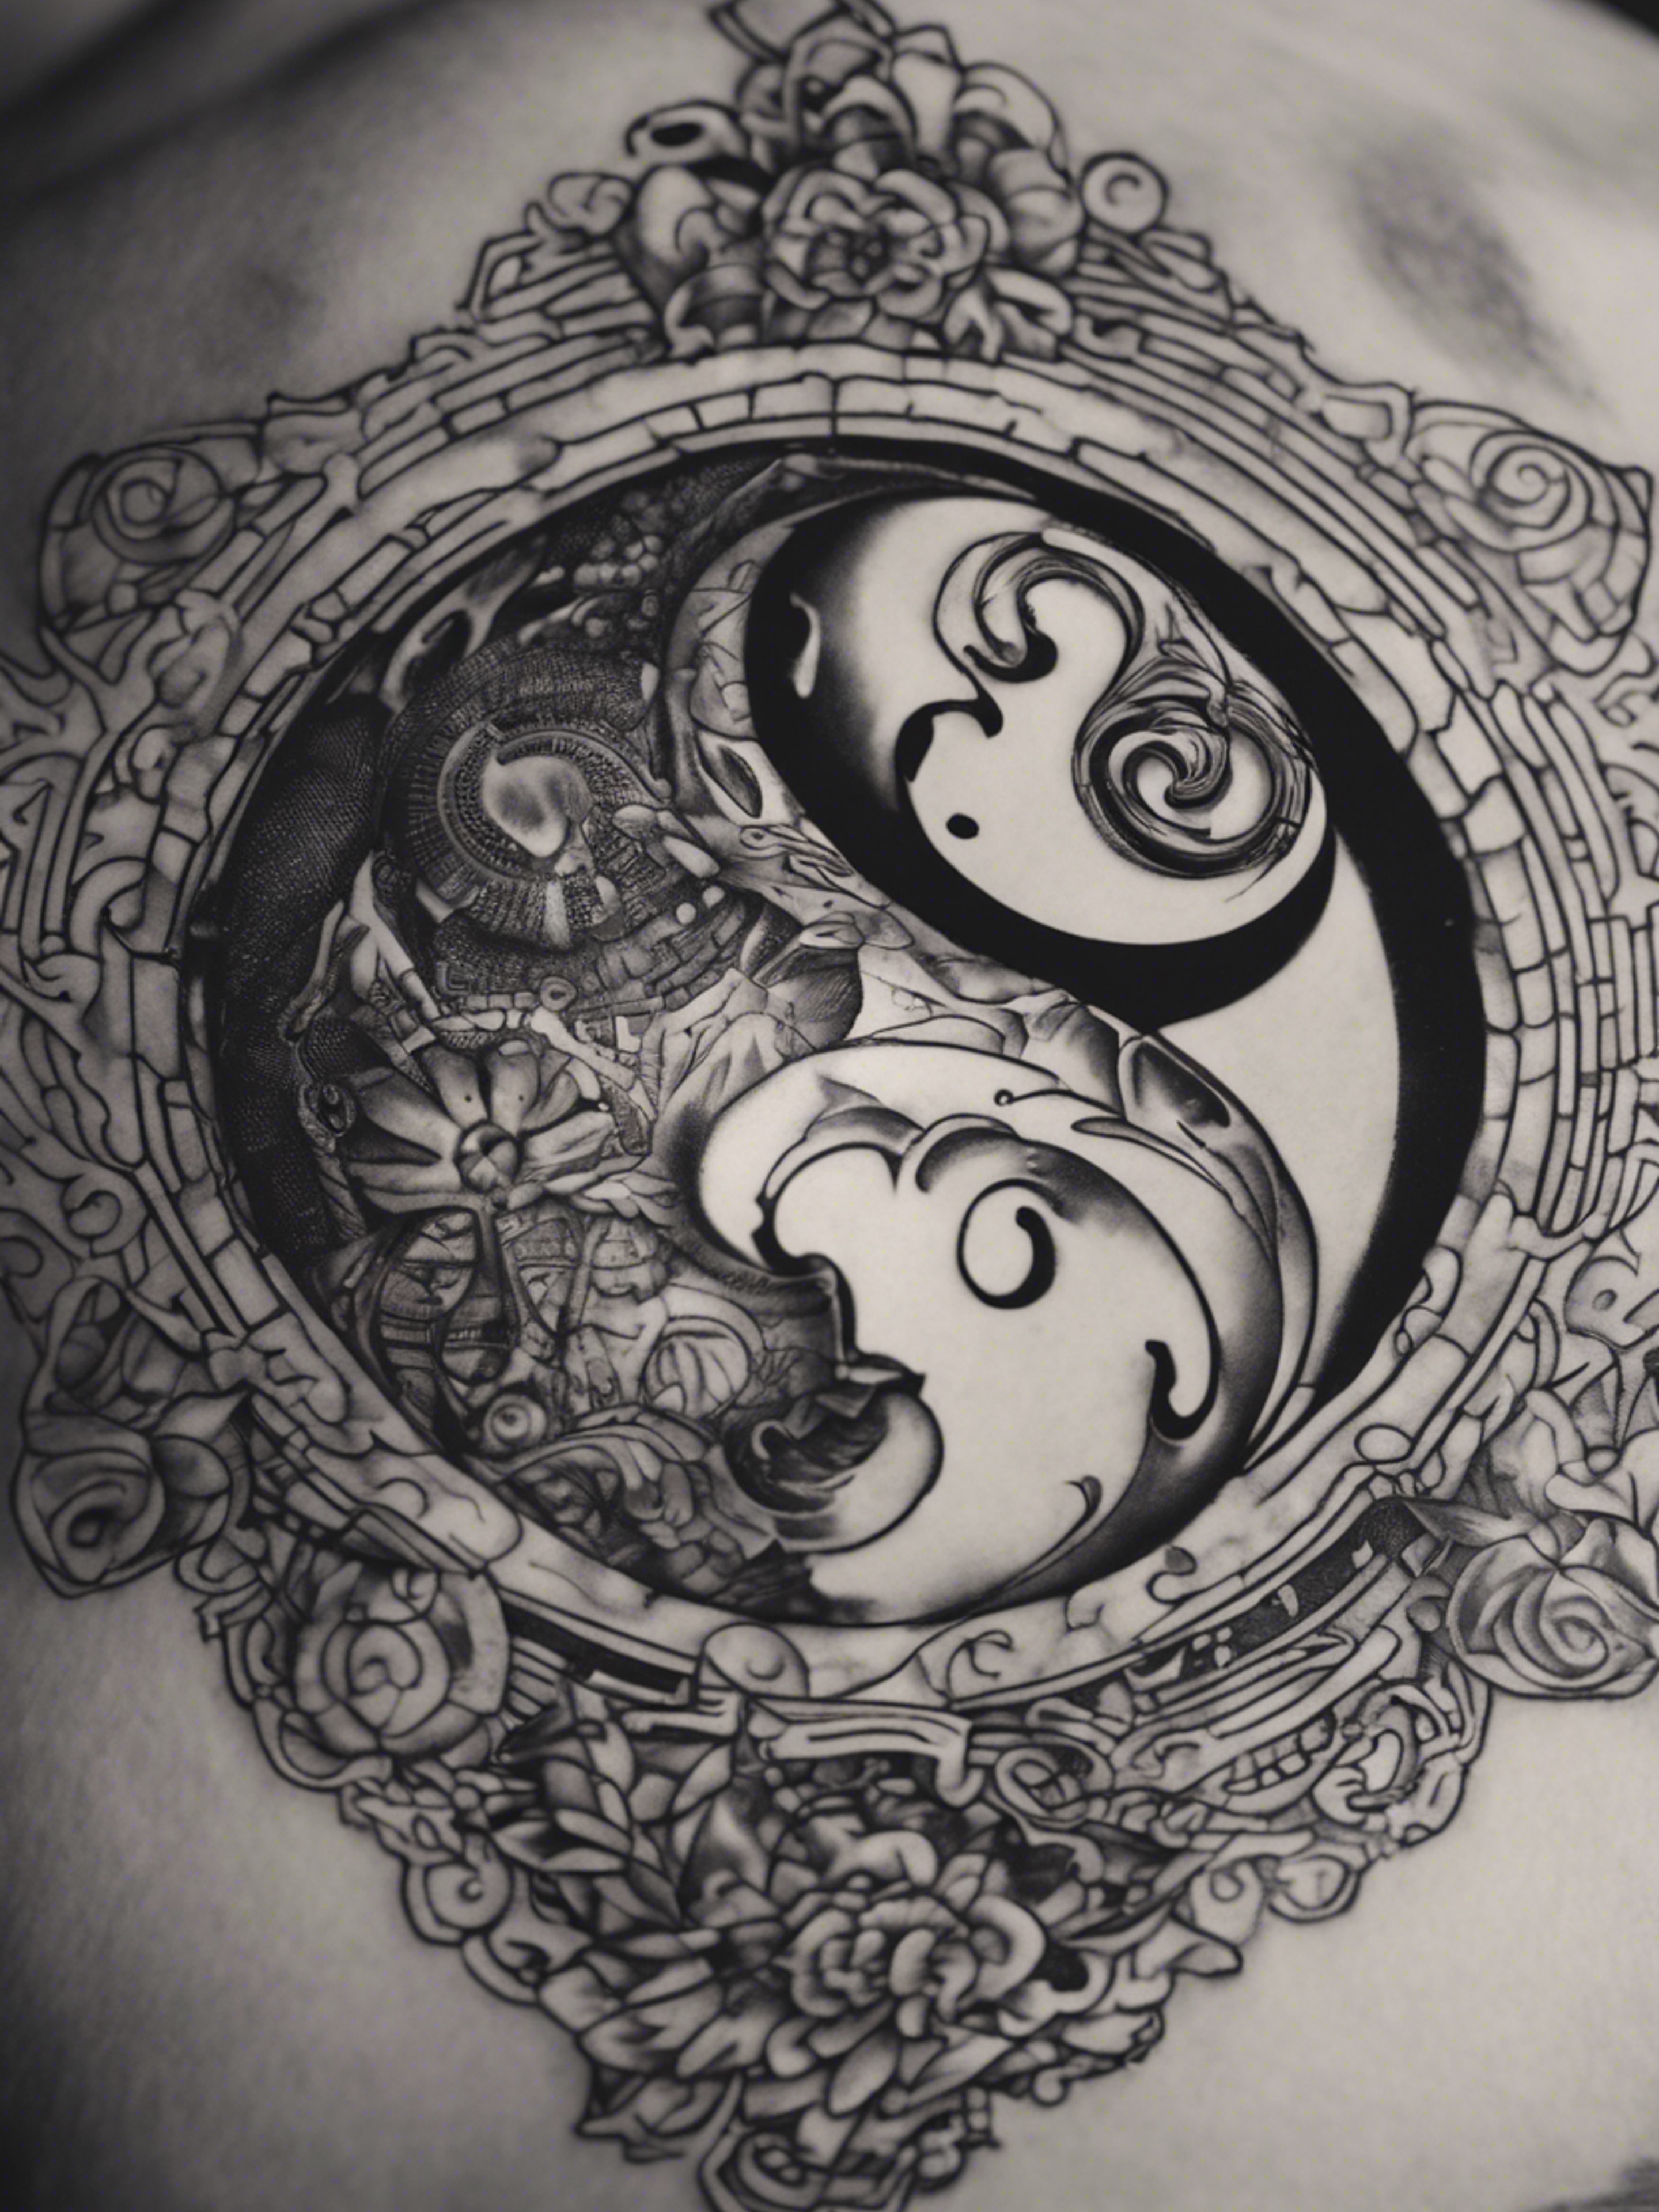 A black and gray tattoo demonstrating the sharp contrast of yin and yang. Tapeta[cf6688009cd14e619f30]